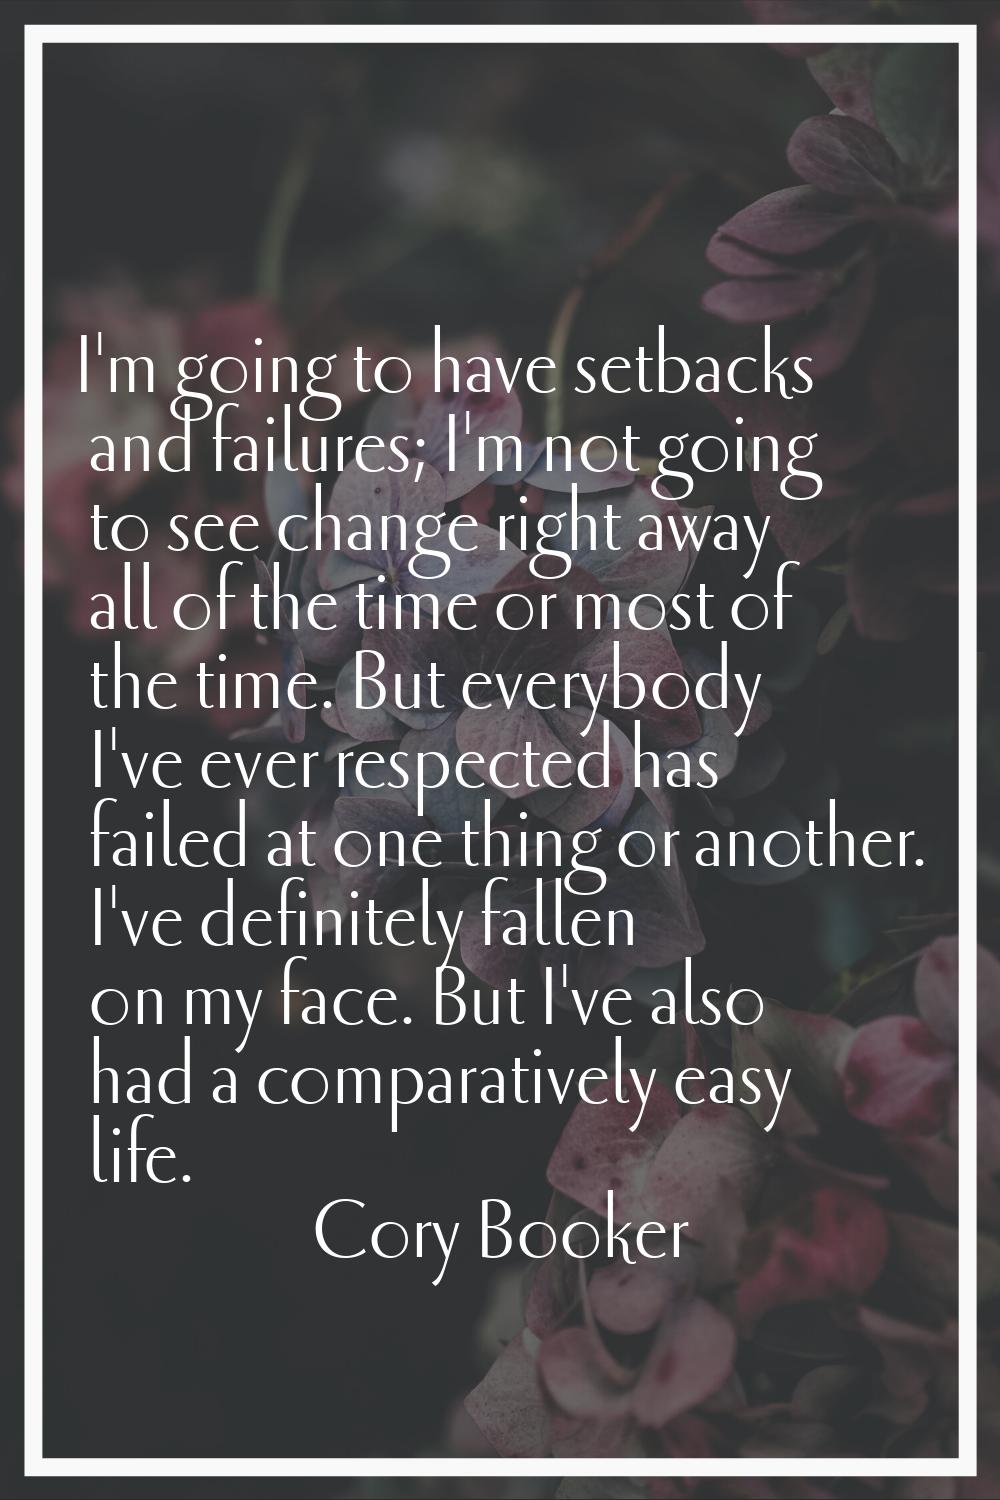 I'm going to have setbacks and failures; I'm not going to see change right away all of the time or 